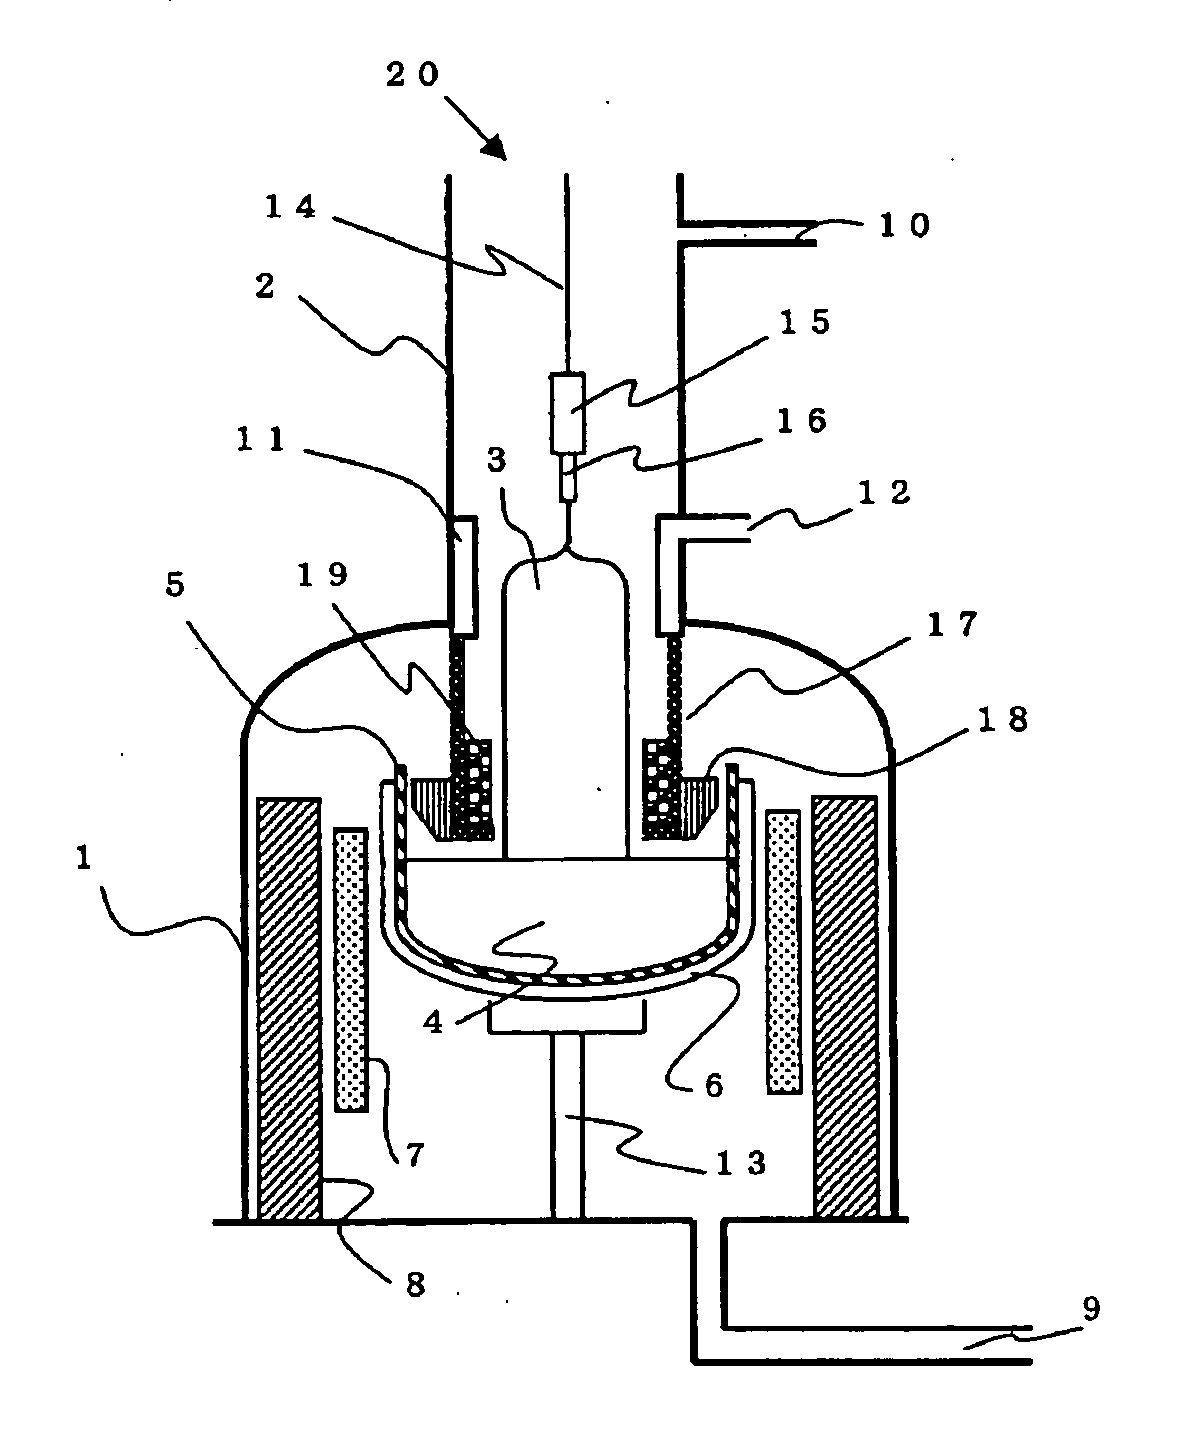 An Apparatus for Producing a Single Crystal